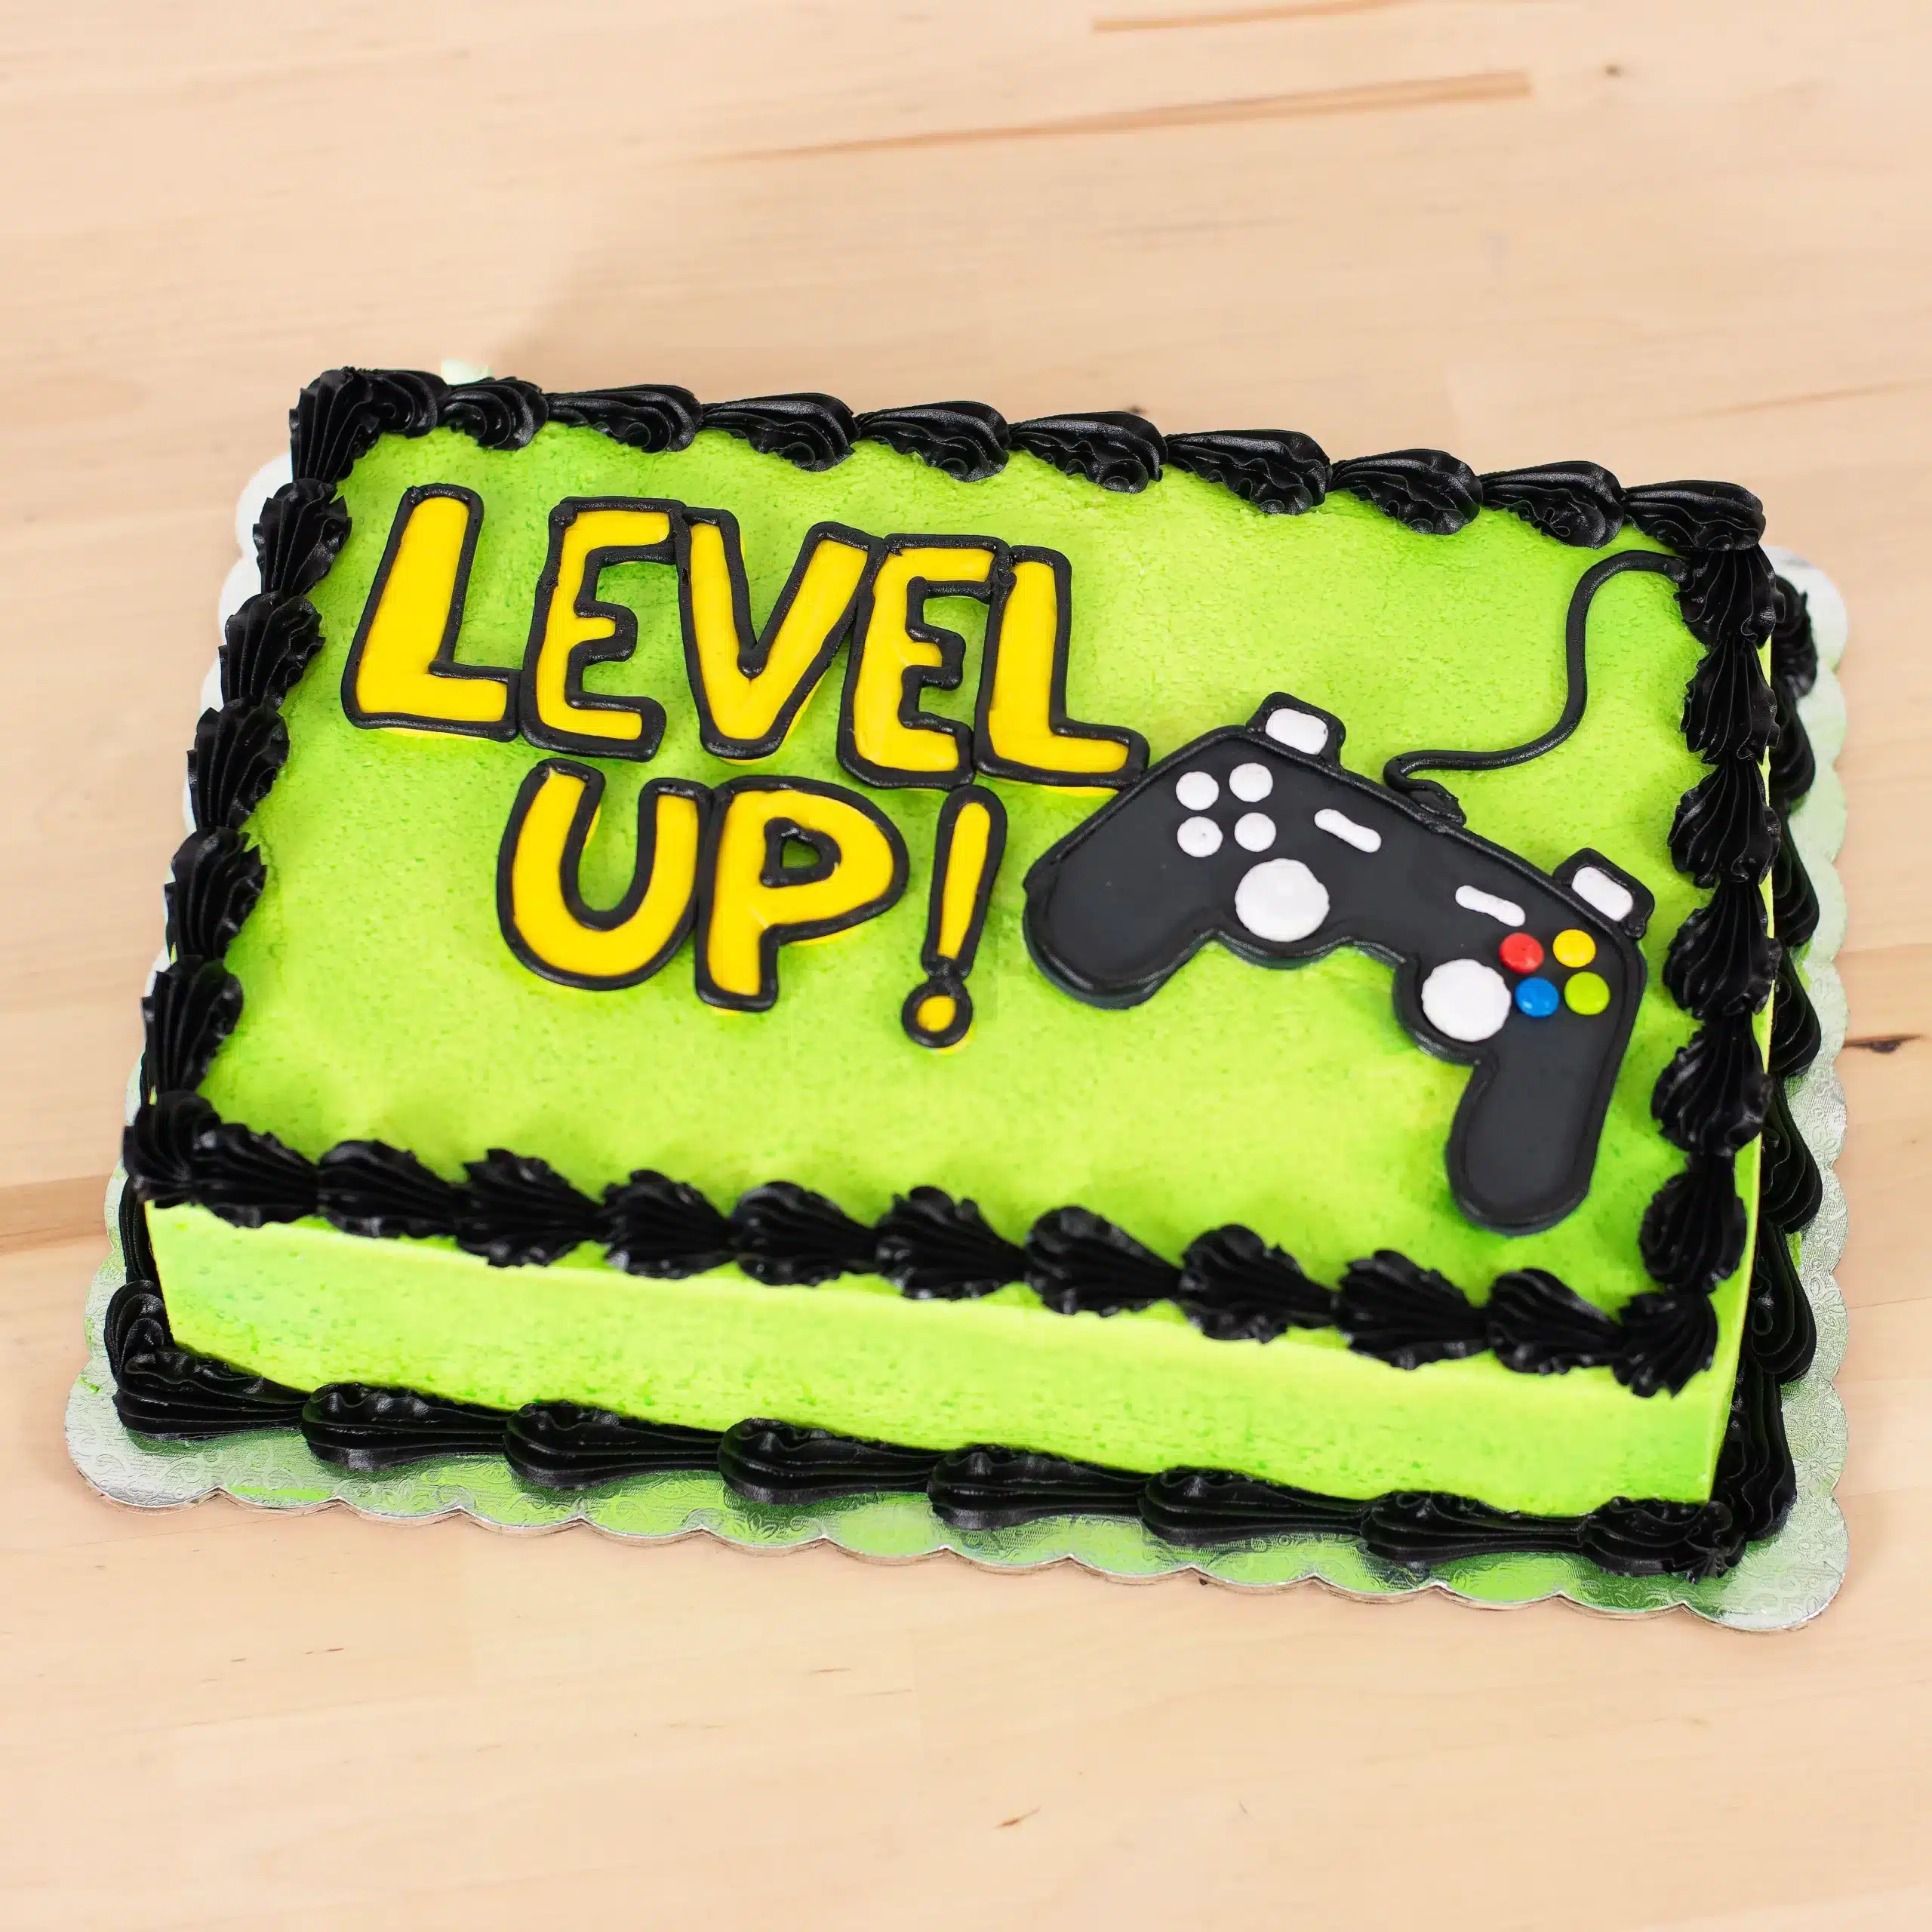 Most Iconic Cakes In Gaming